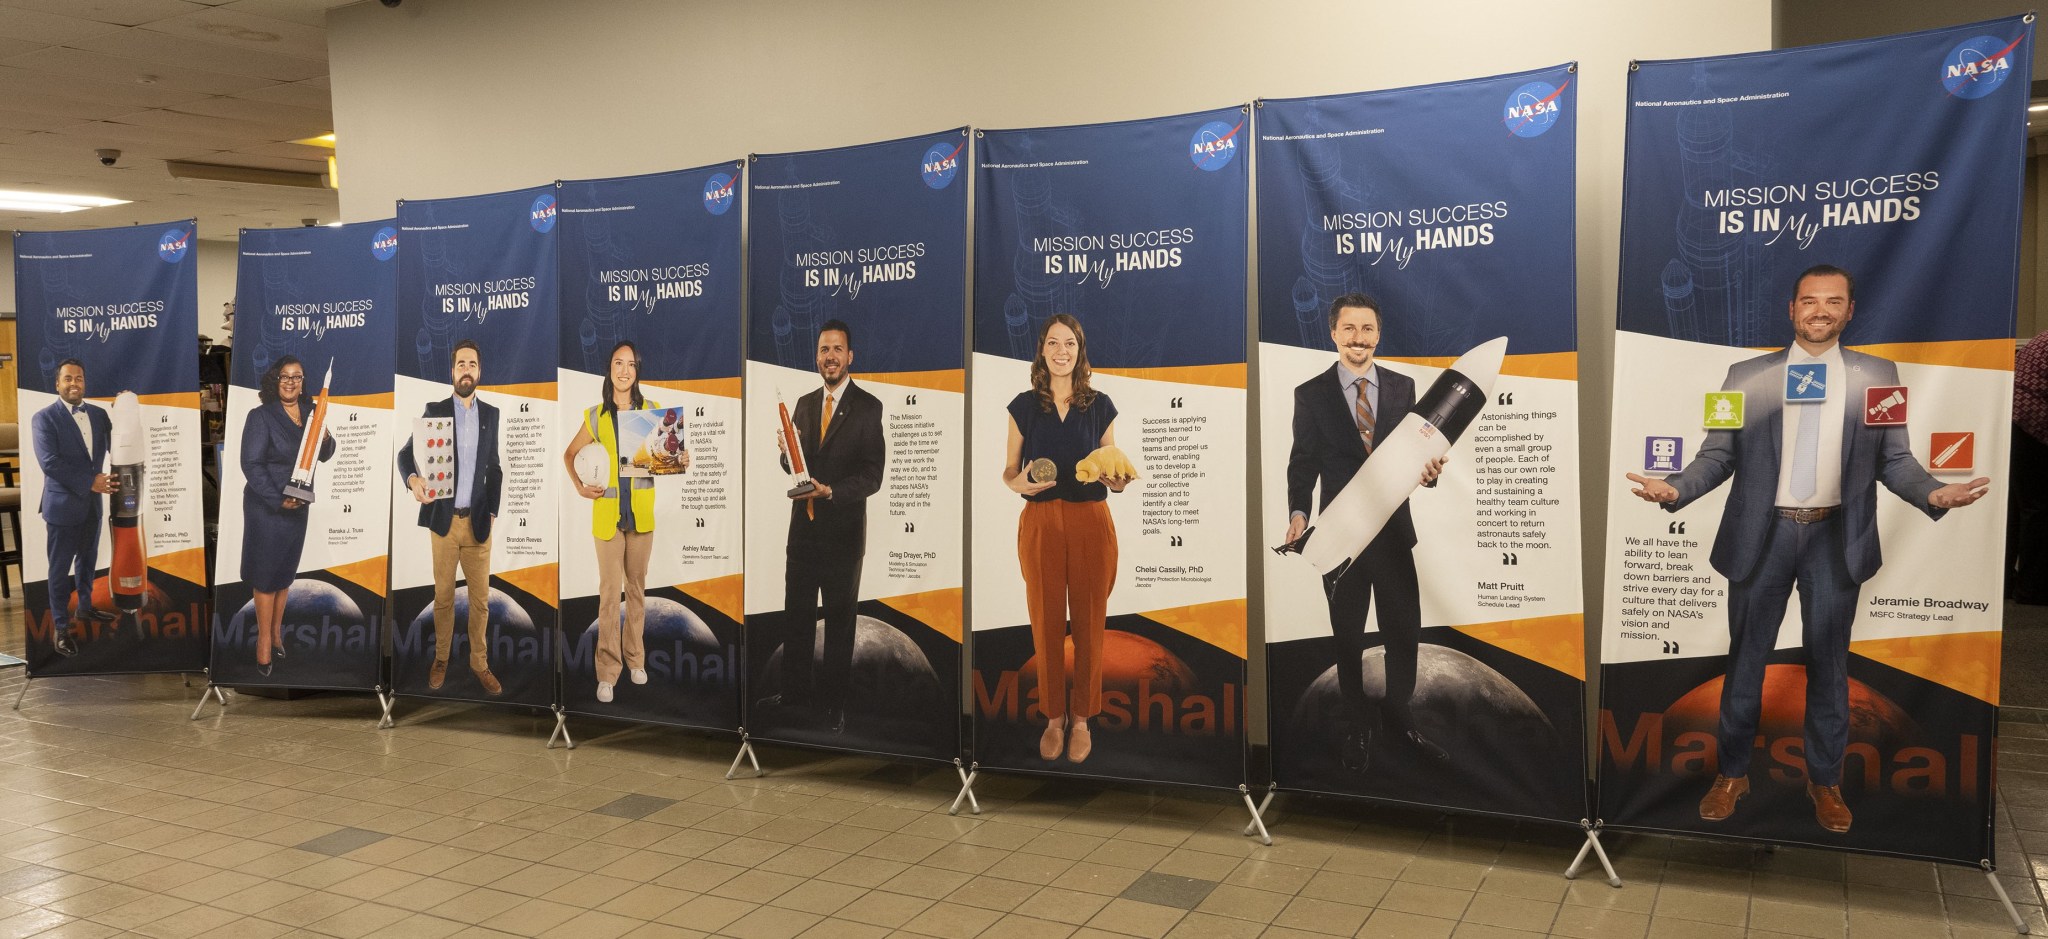 Eight new testimonial banners are displayed as part of the Mission Success is in Our Hands Shared Experiences Forum